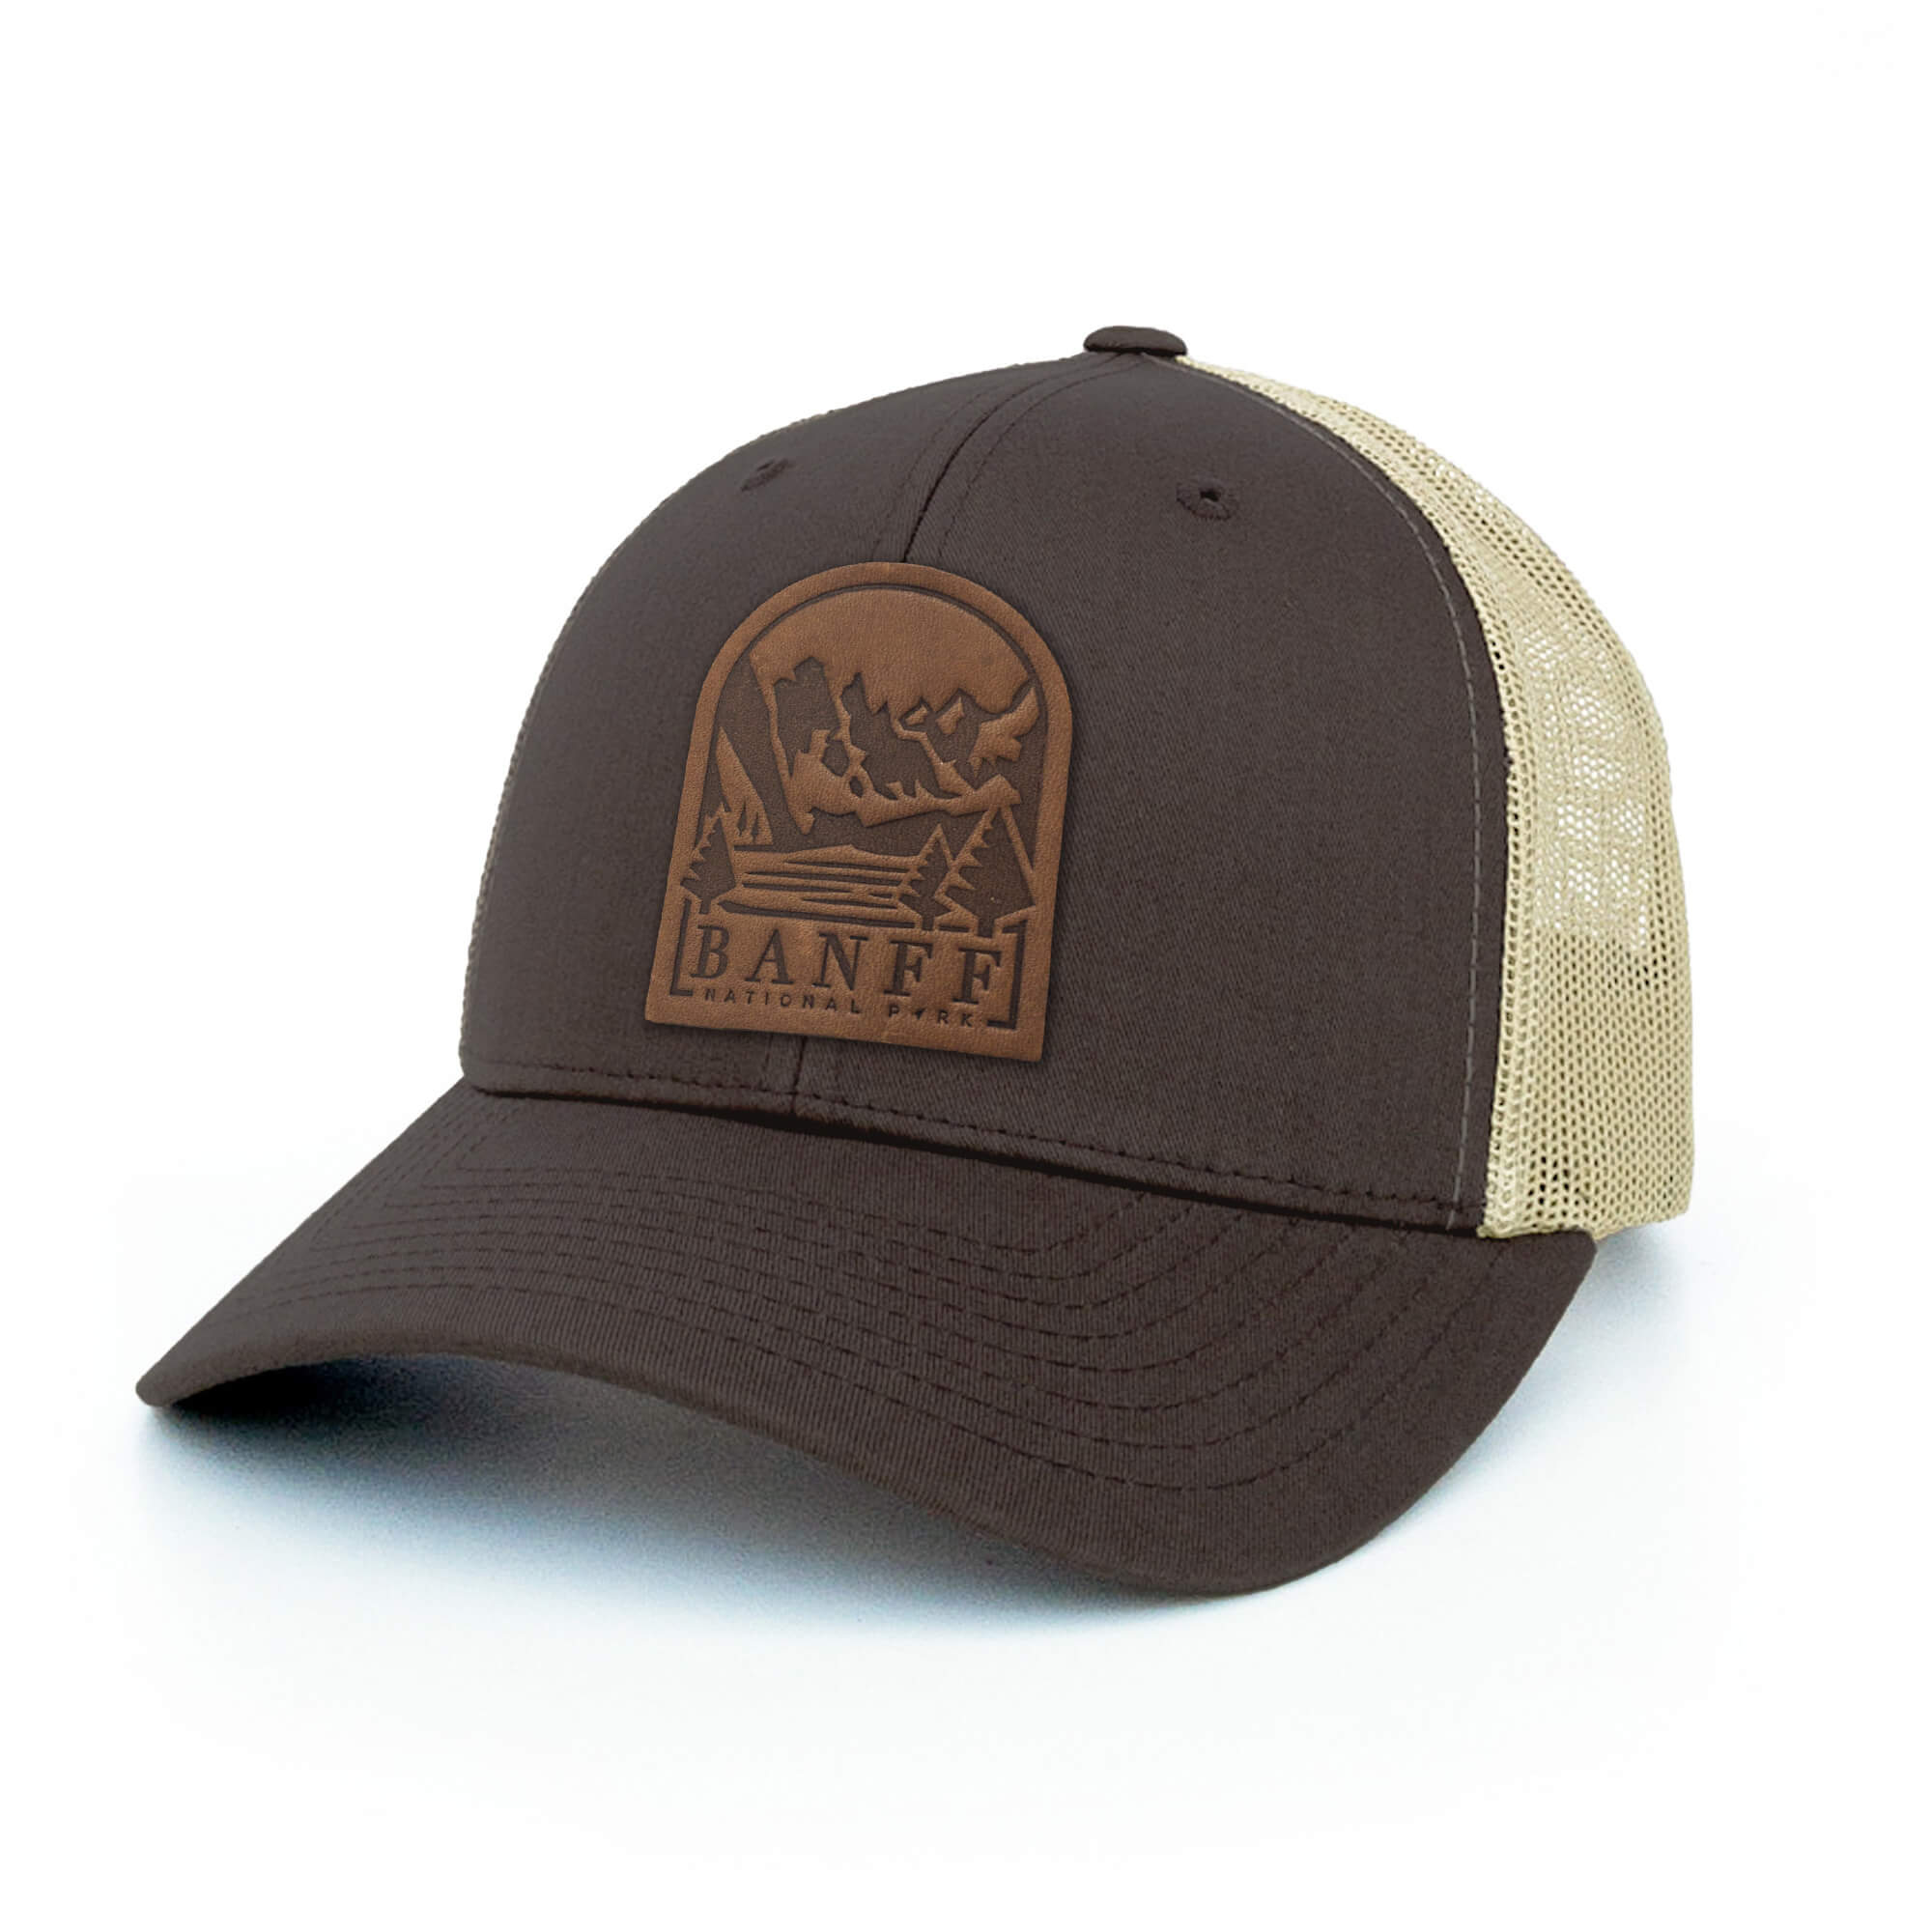 Brown and khaki trucker hat with full-grain leather patch of Banff National Park | BLACK-007-001, CHARC-007-001, NAVY-007-001, HGREY-007-001, MOSS-007-001, BROWN-007-001